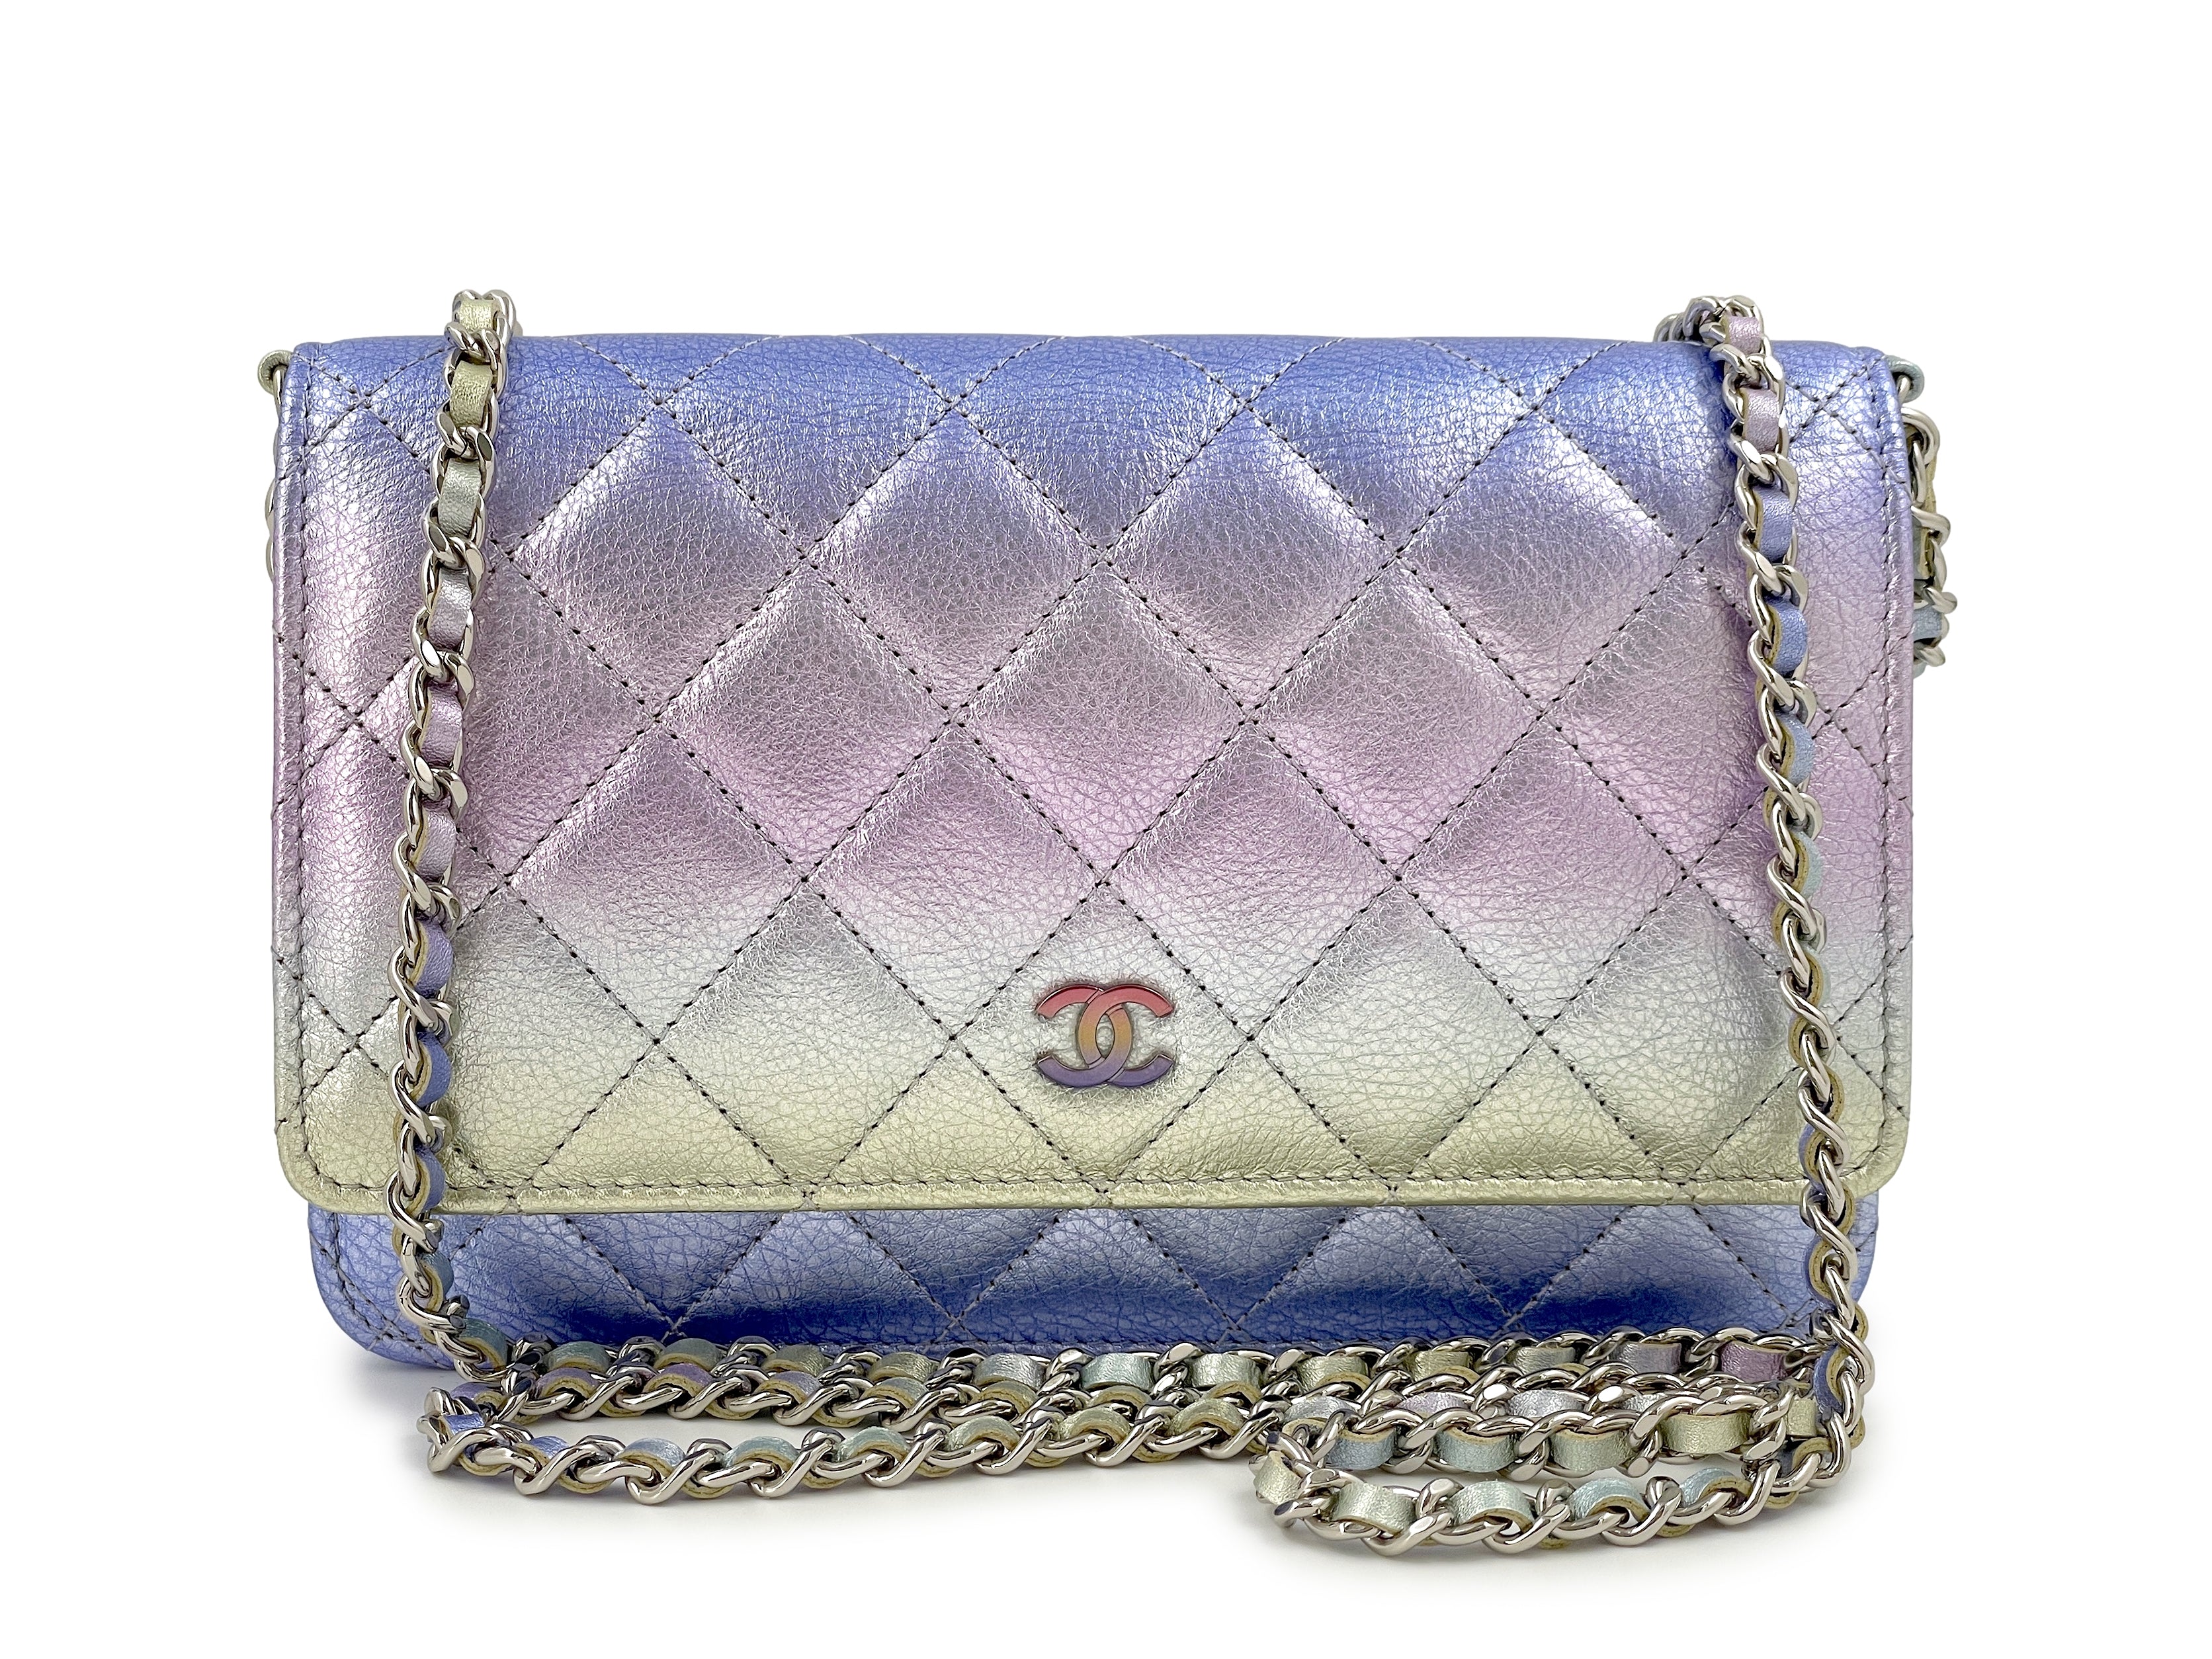 Holographic Chanel purse, IG: threadsstyling